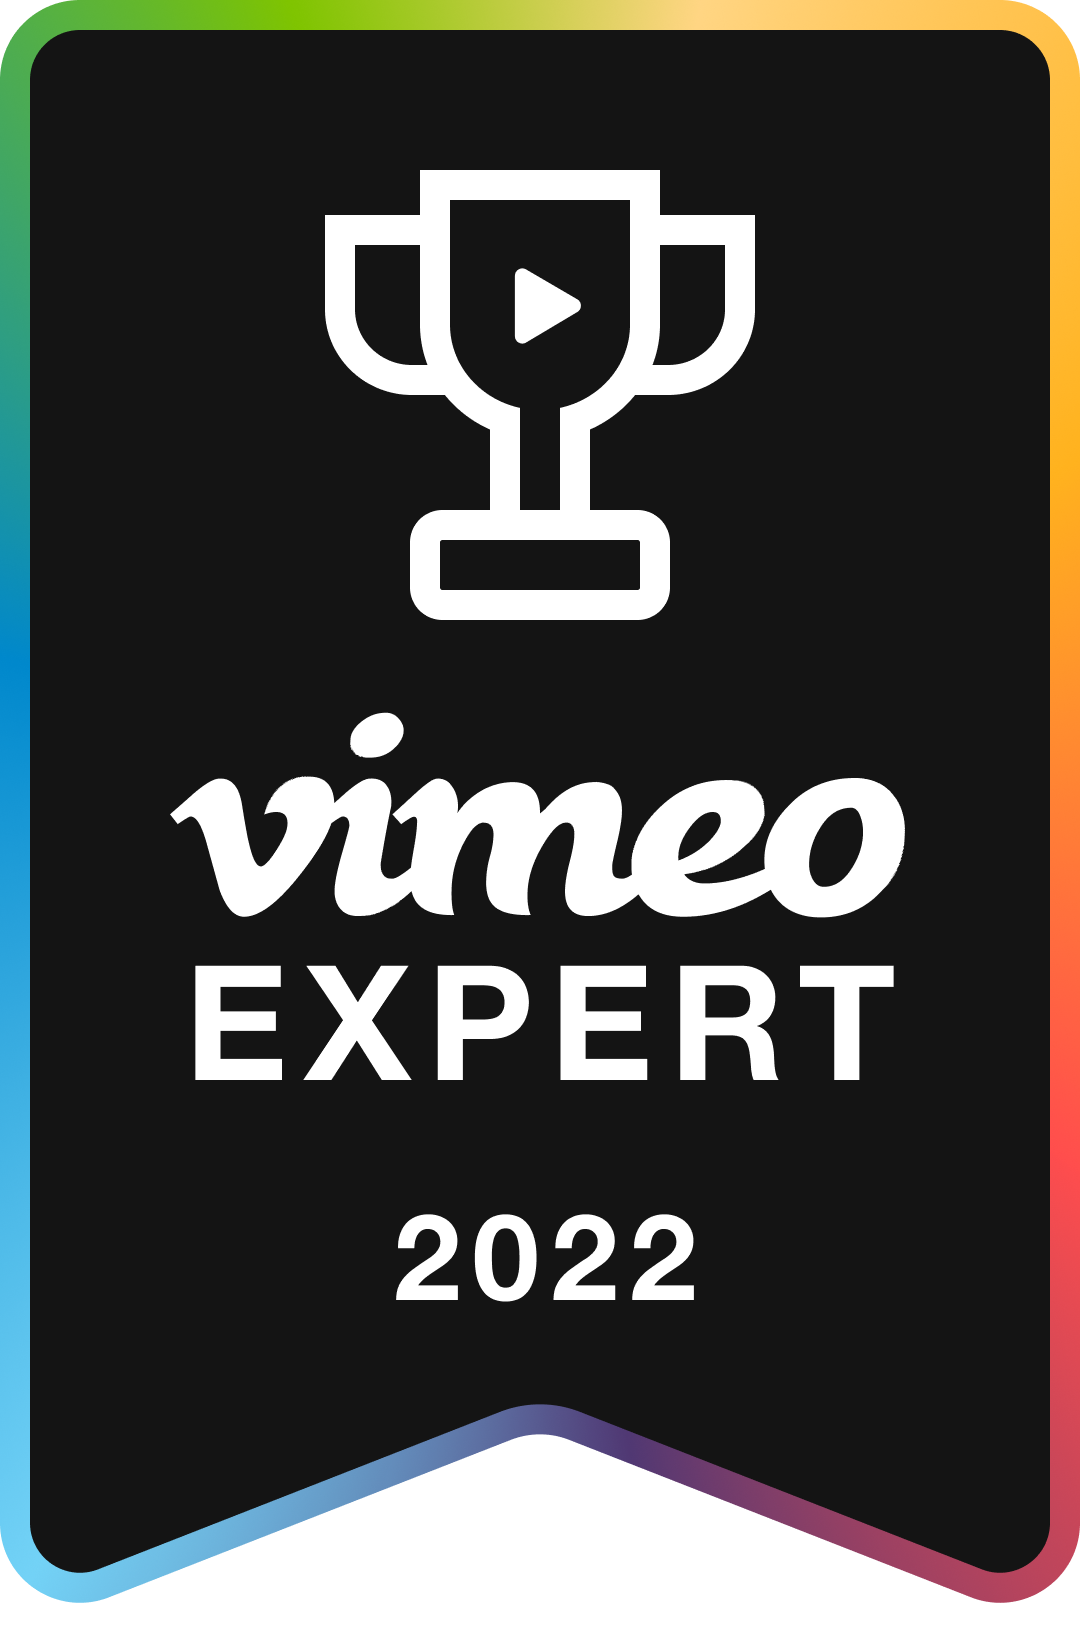 MADEGRANDBYCAM Vimeo Expert in Video Marketing and Live Streaming 2022